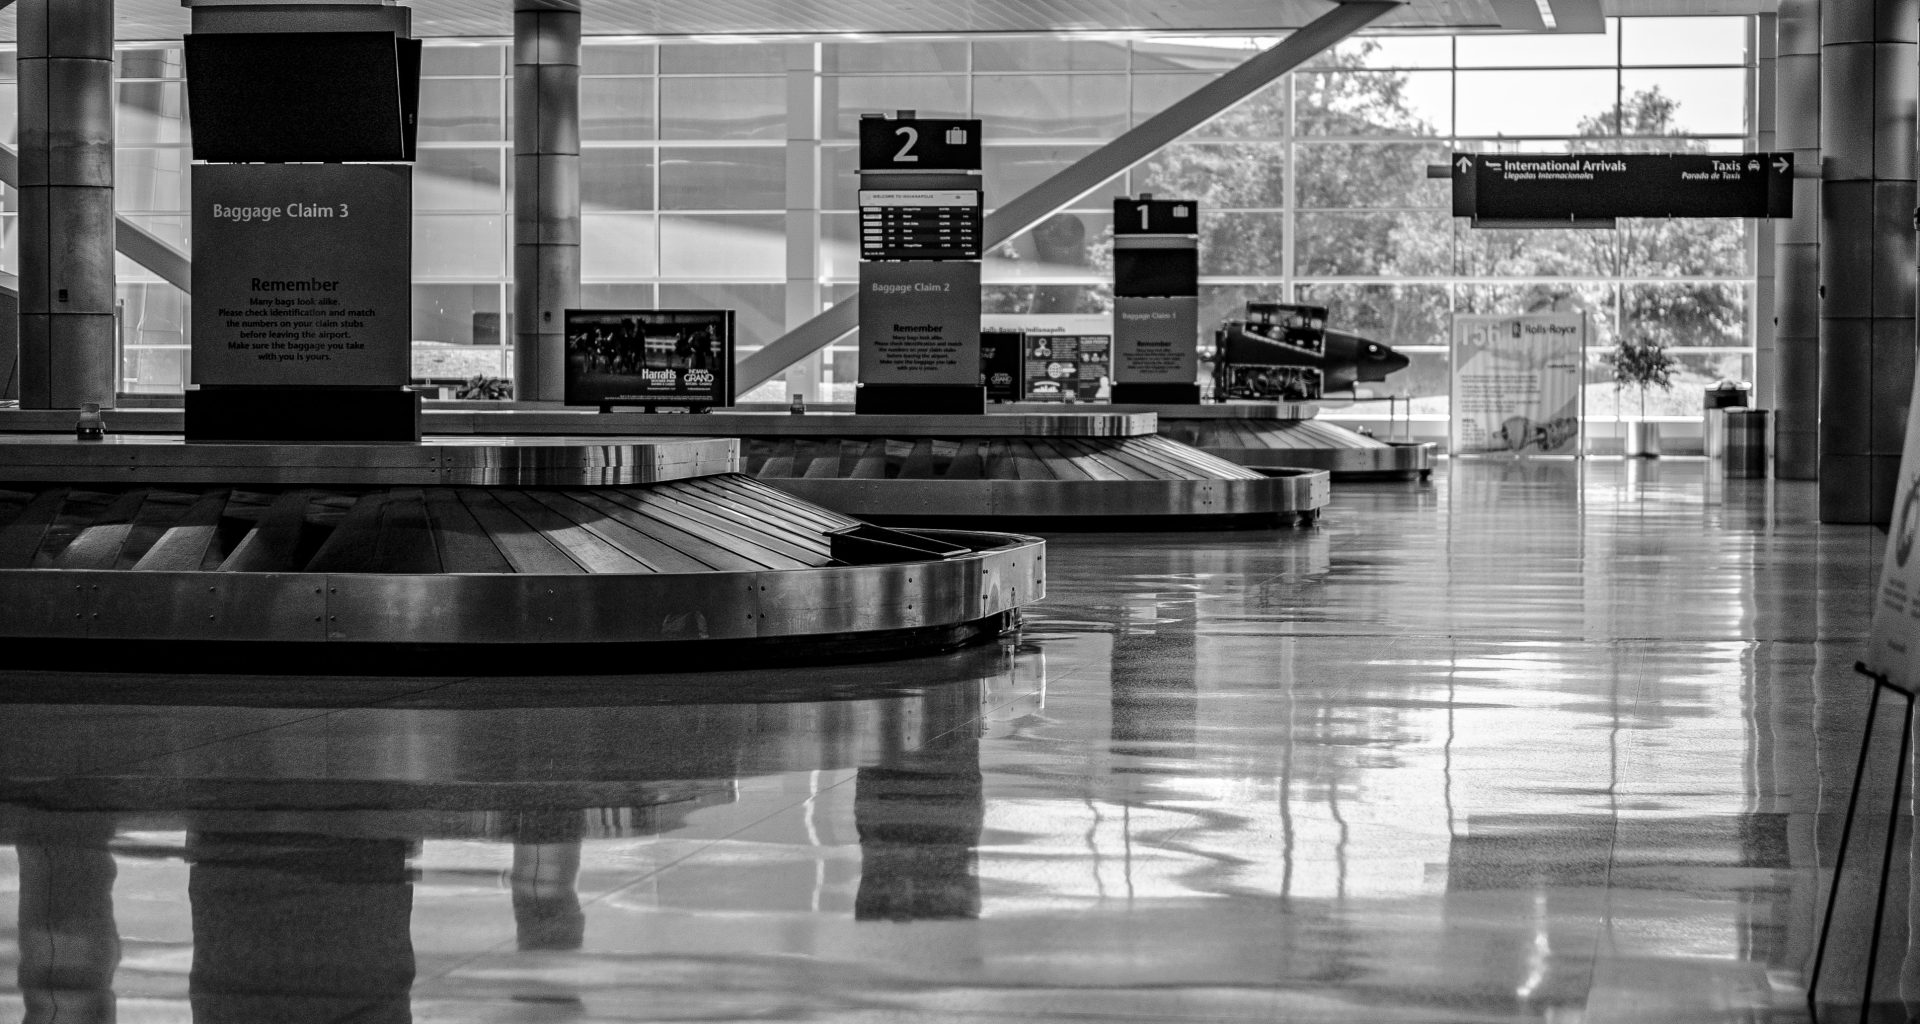 Empty baggage carousel at an airport